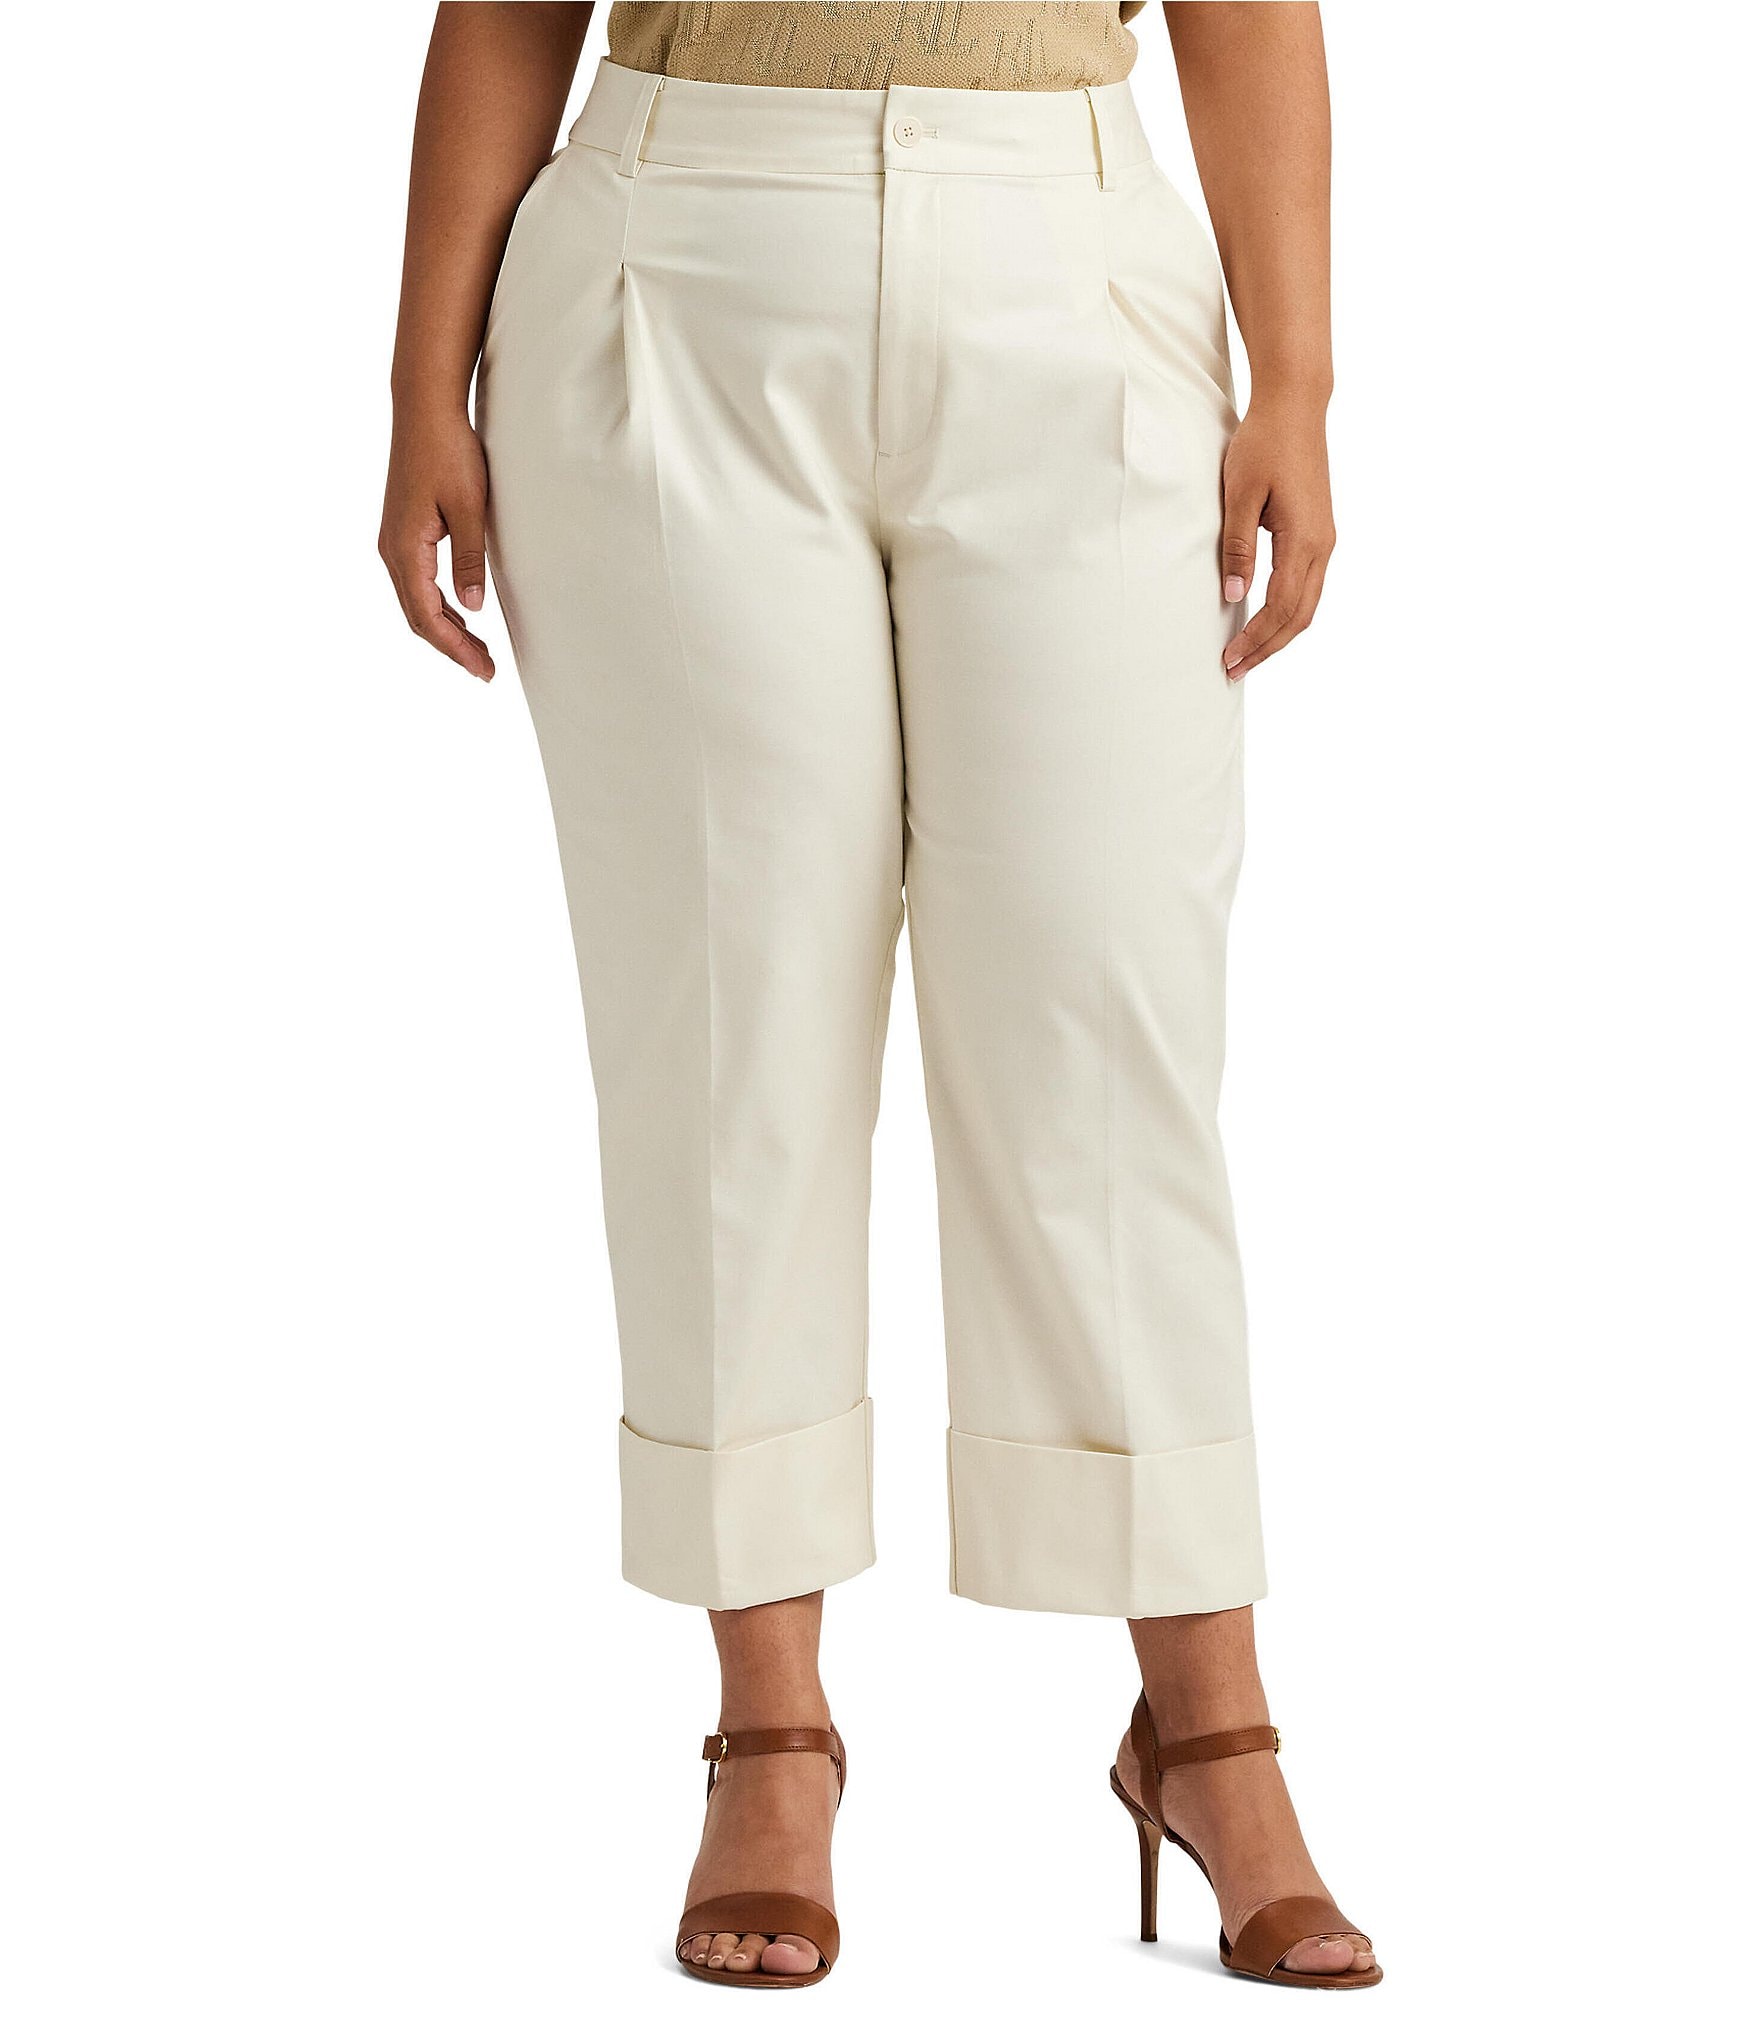 Eileen Fisher Plus Size Washable Stretch Crepe Slim Leg Ankle Pants